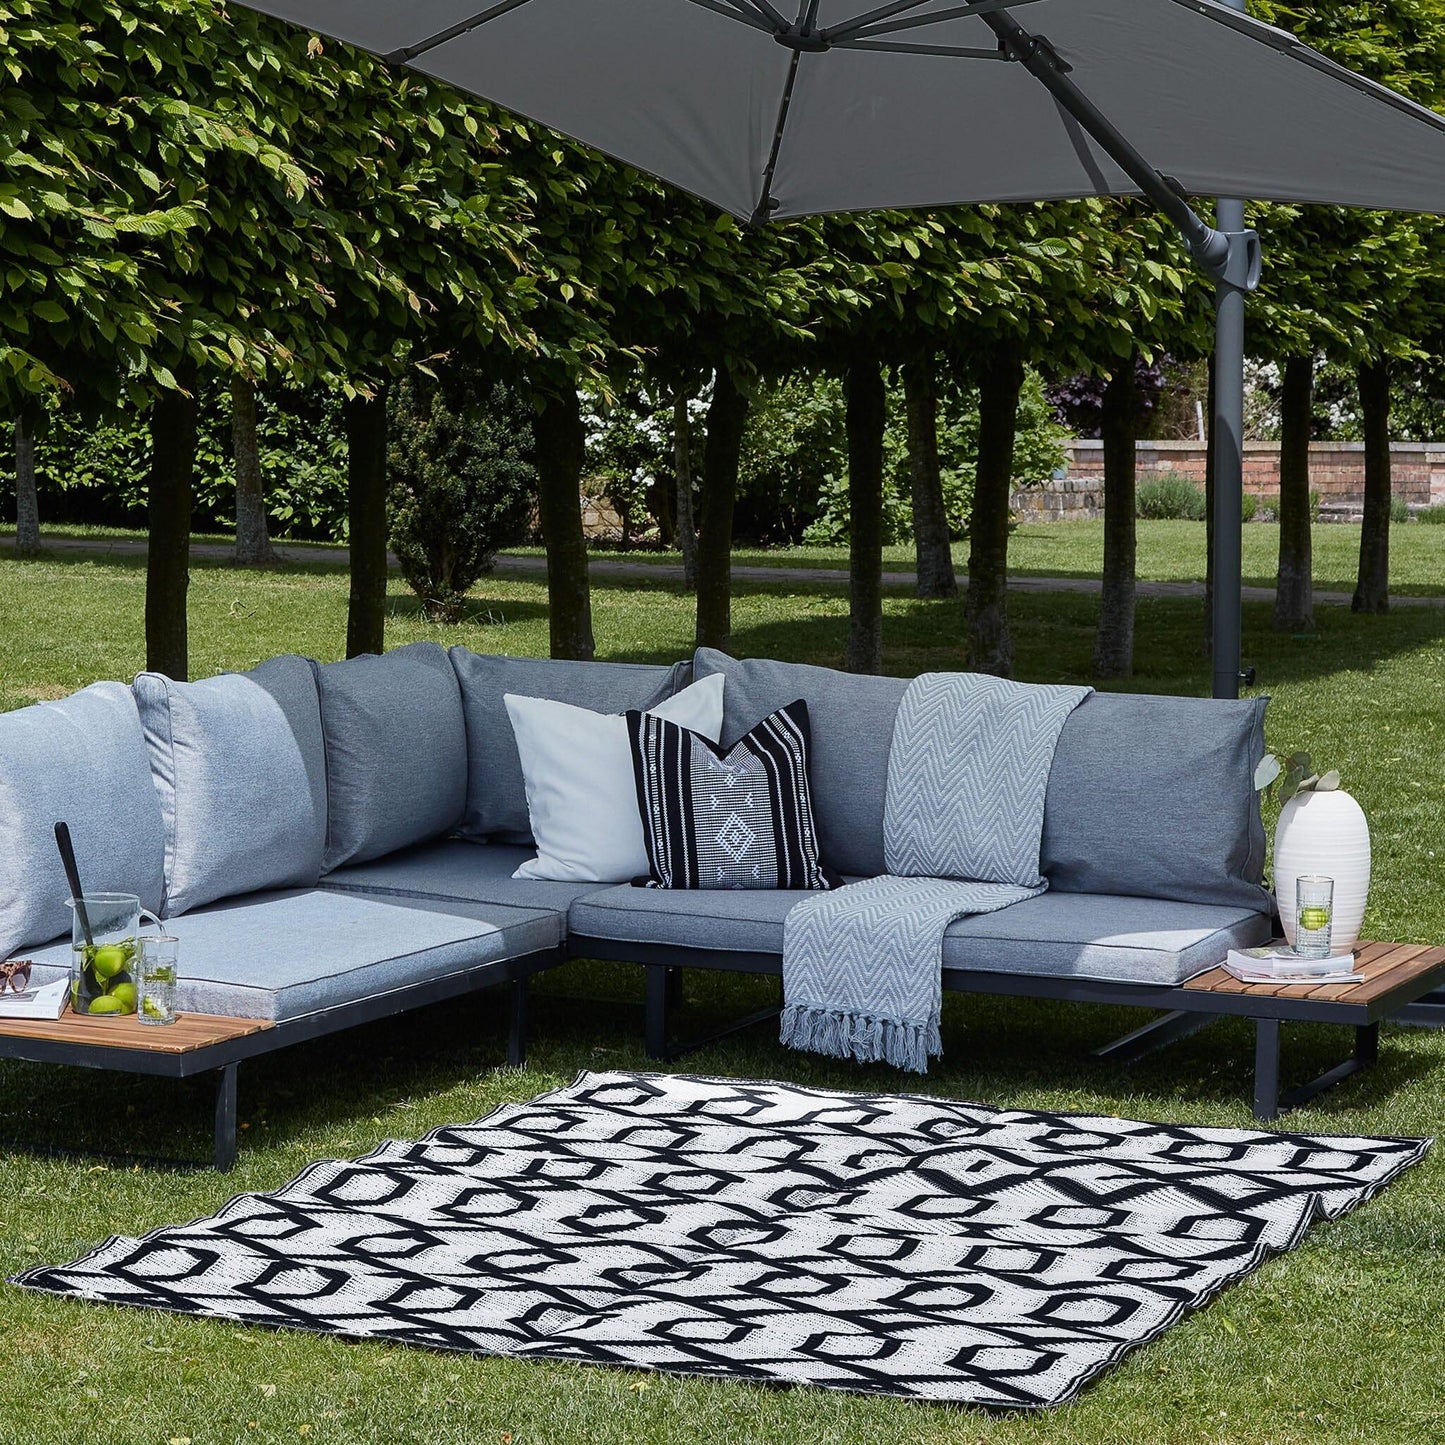 Reversible Outdoor Rug - Black and White - 160cm x 230cm